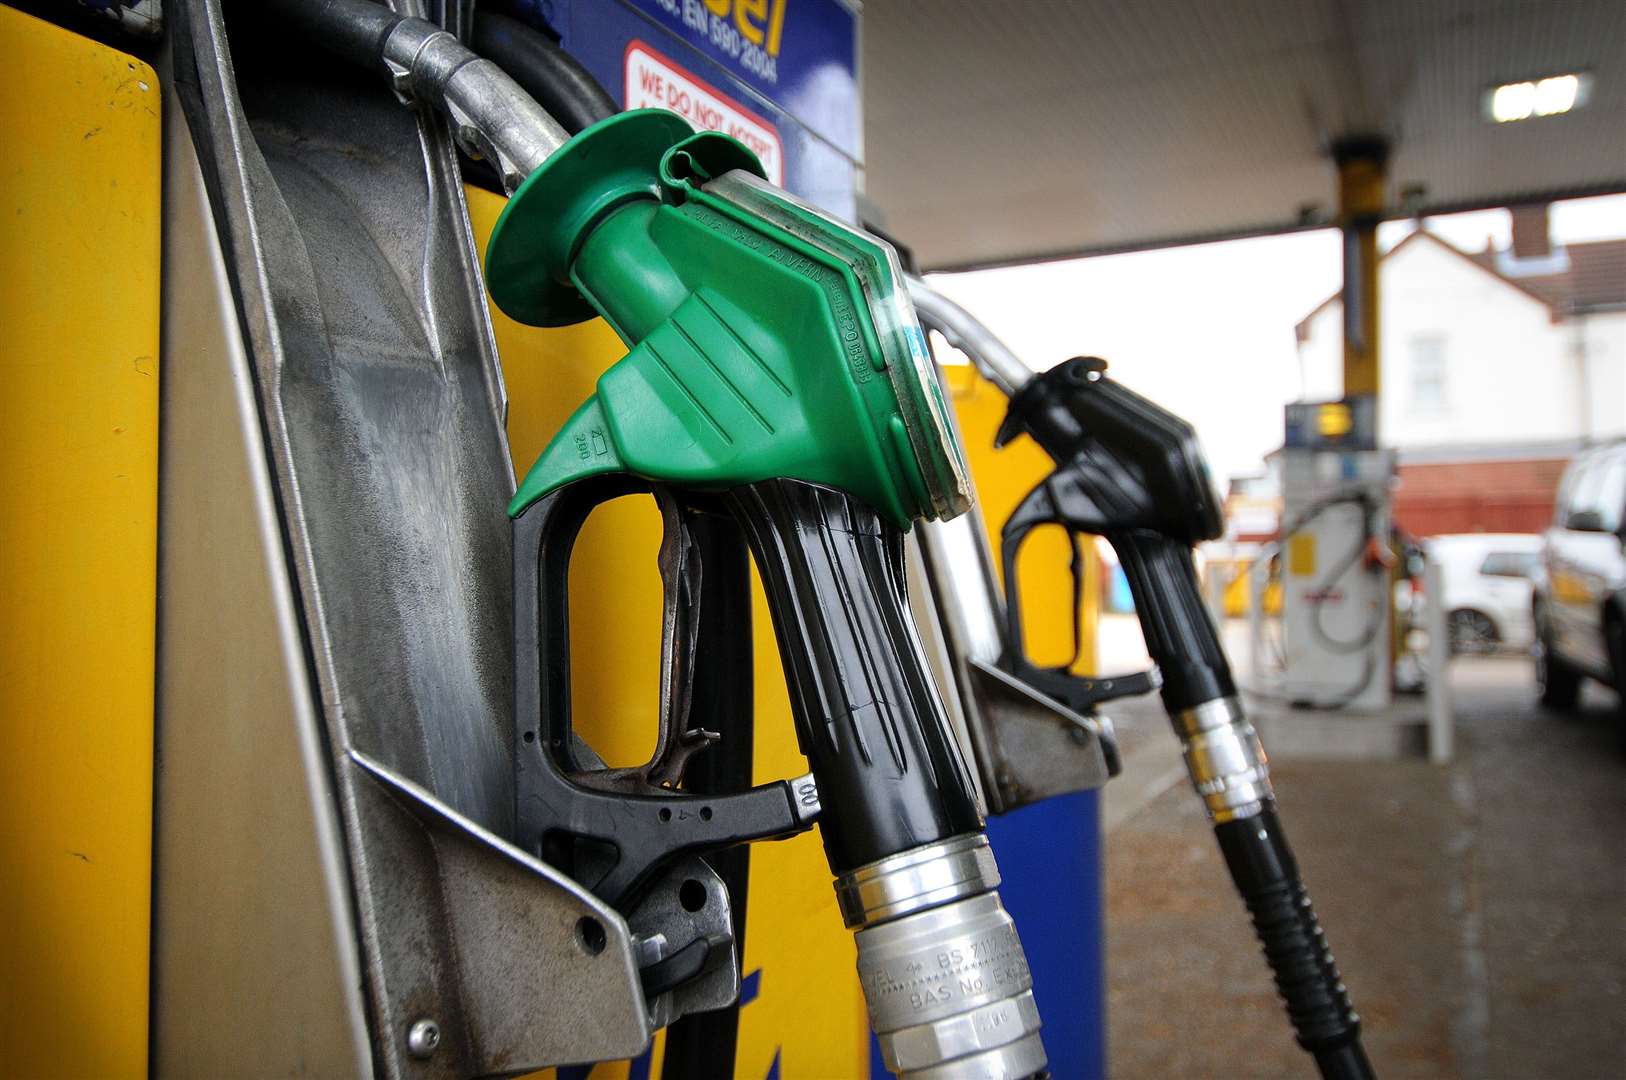 Petrol prices hit an all-time high and are set to rise even further